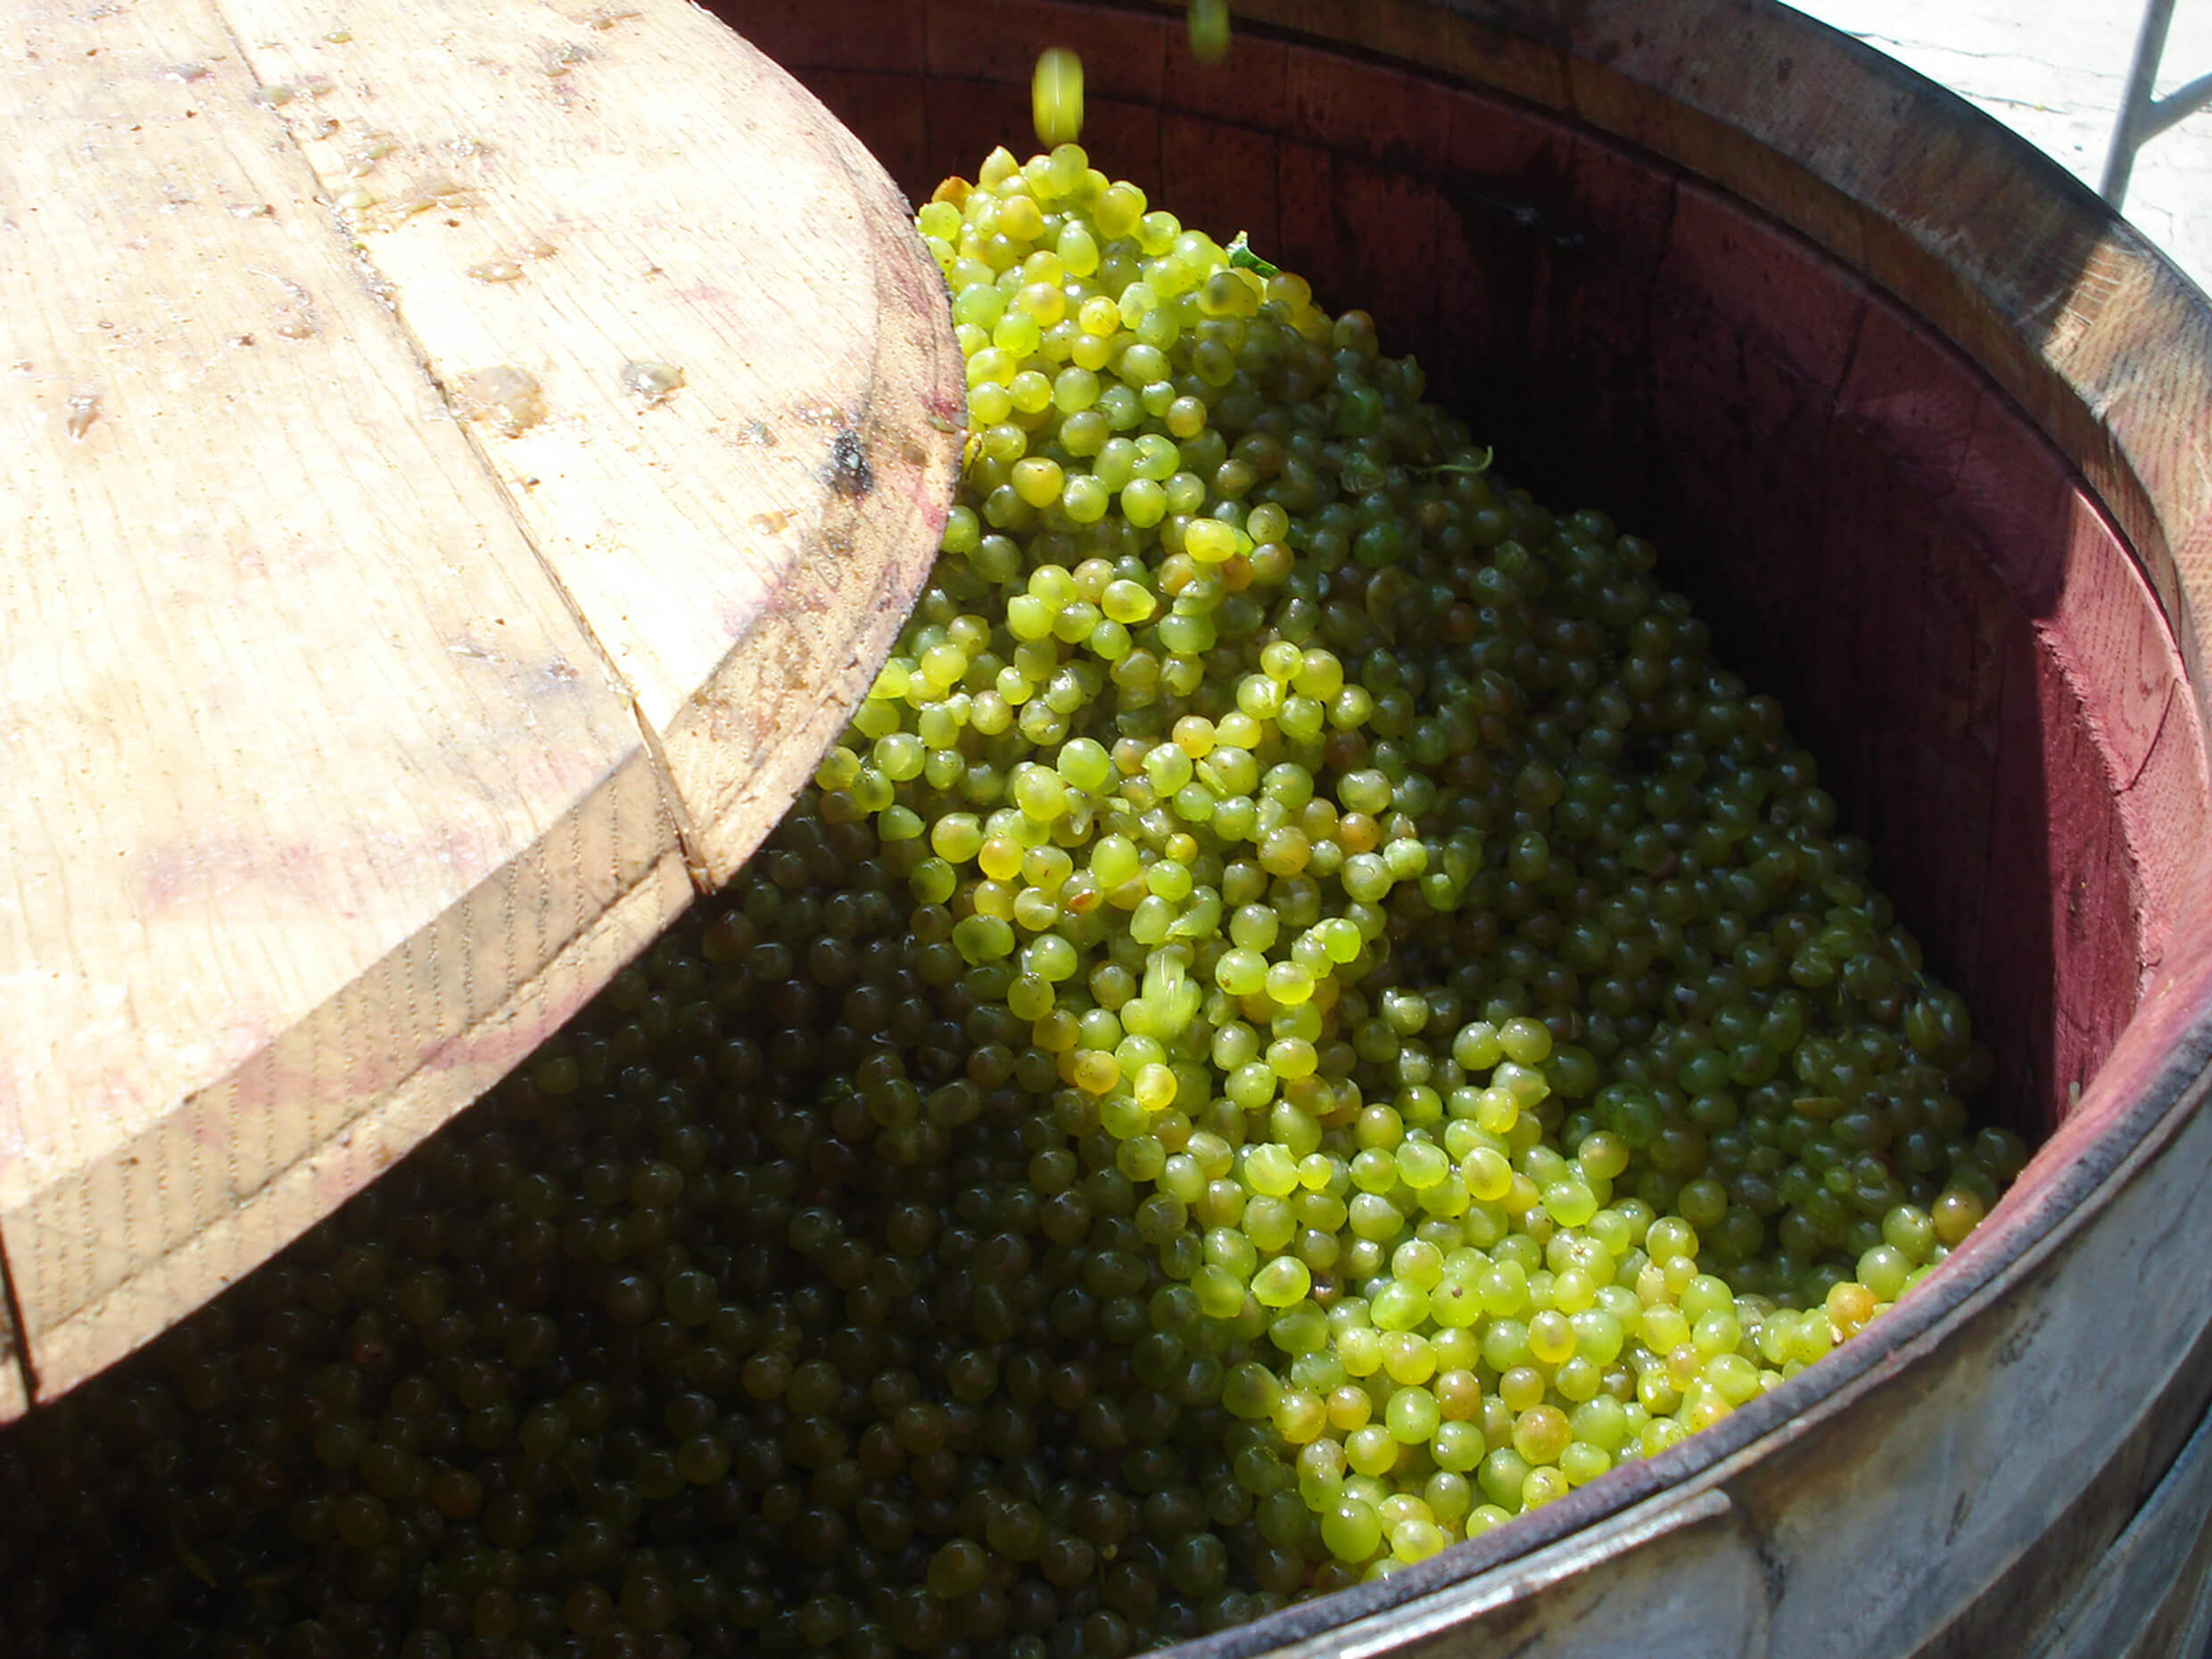 White grapes ready for the first pressing in the winery